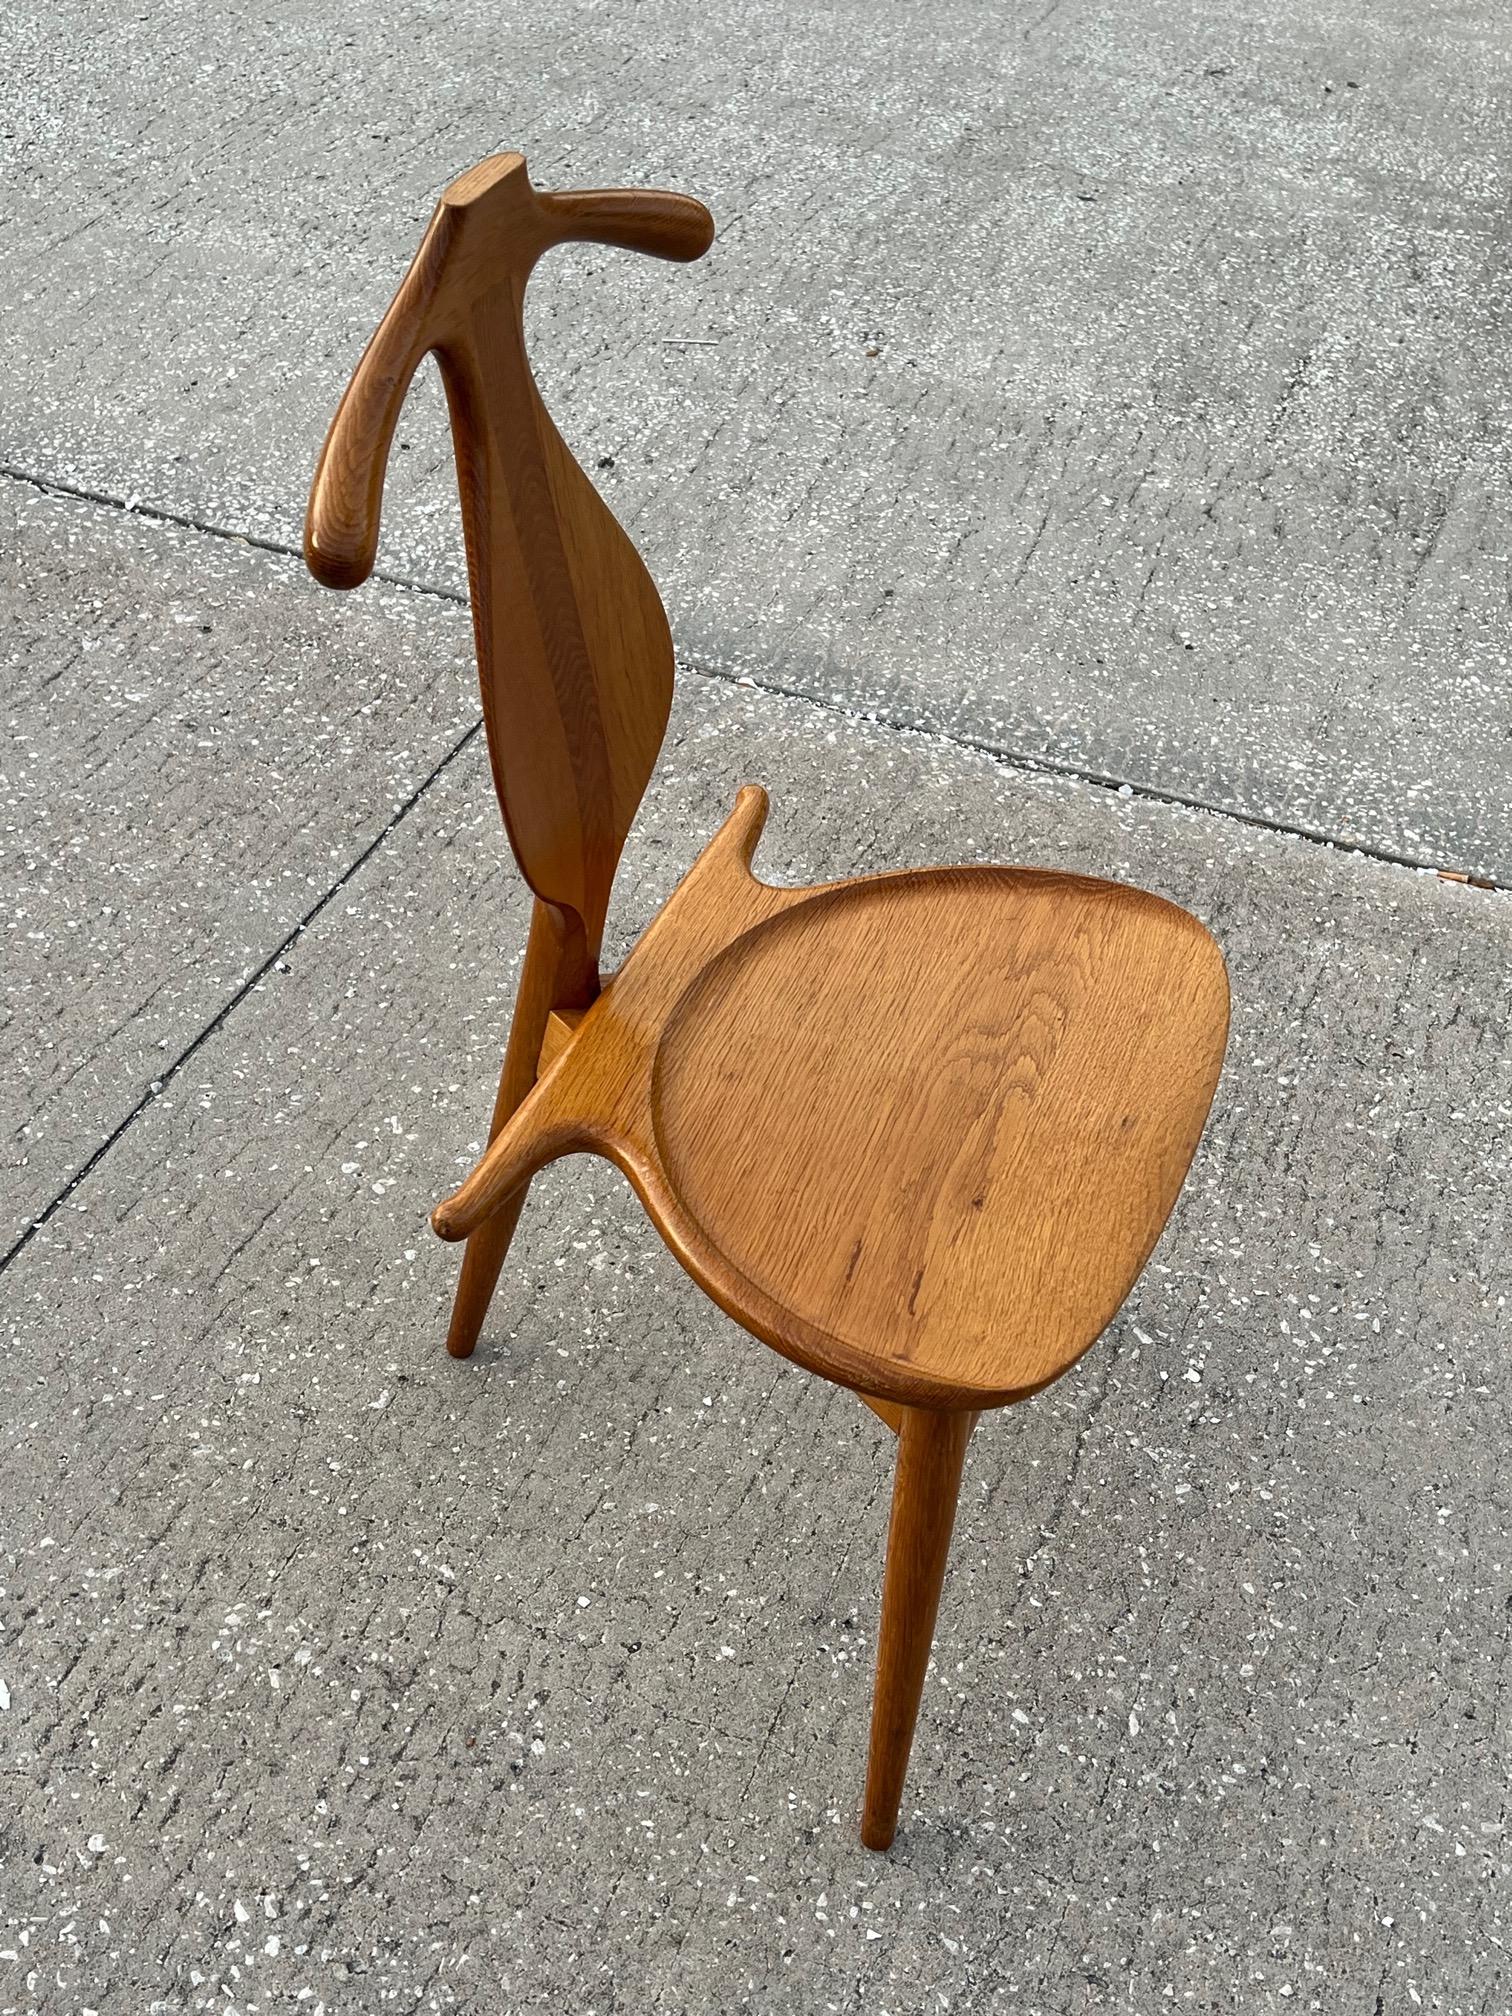 A rare and highly sculptural original Hans Wegner valet chair. Manufactured by Johannes Hansen, Copenhagen, Denmark and imported and sold by Knoll. This version made entirely of solid oak in very good condition. Signed under the seat.